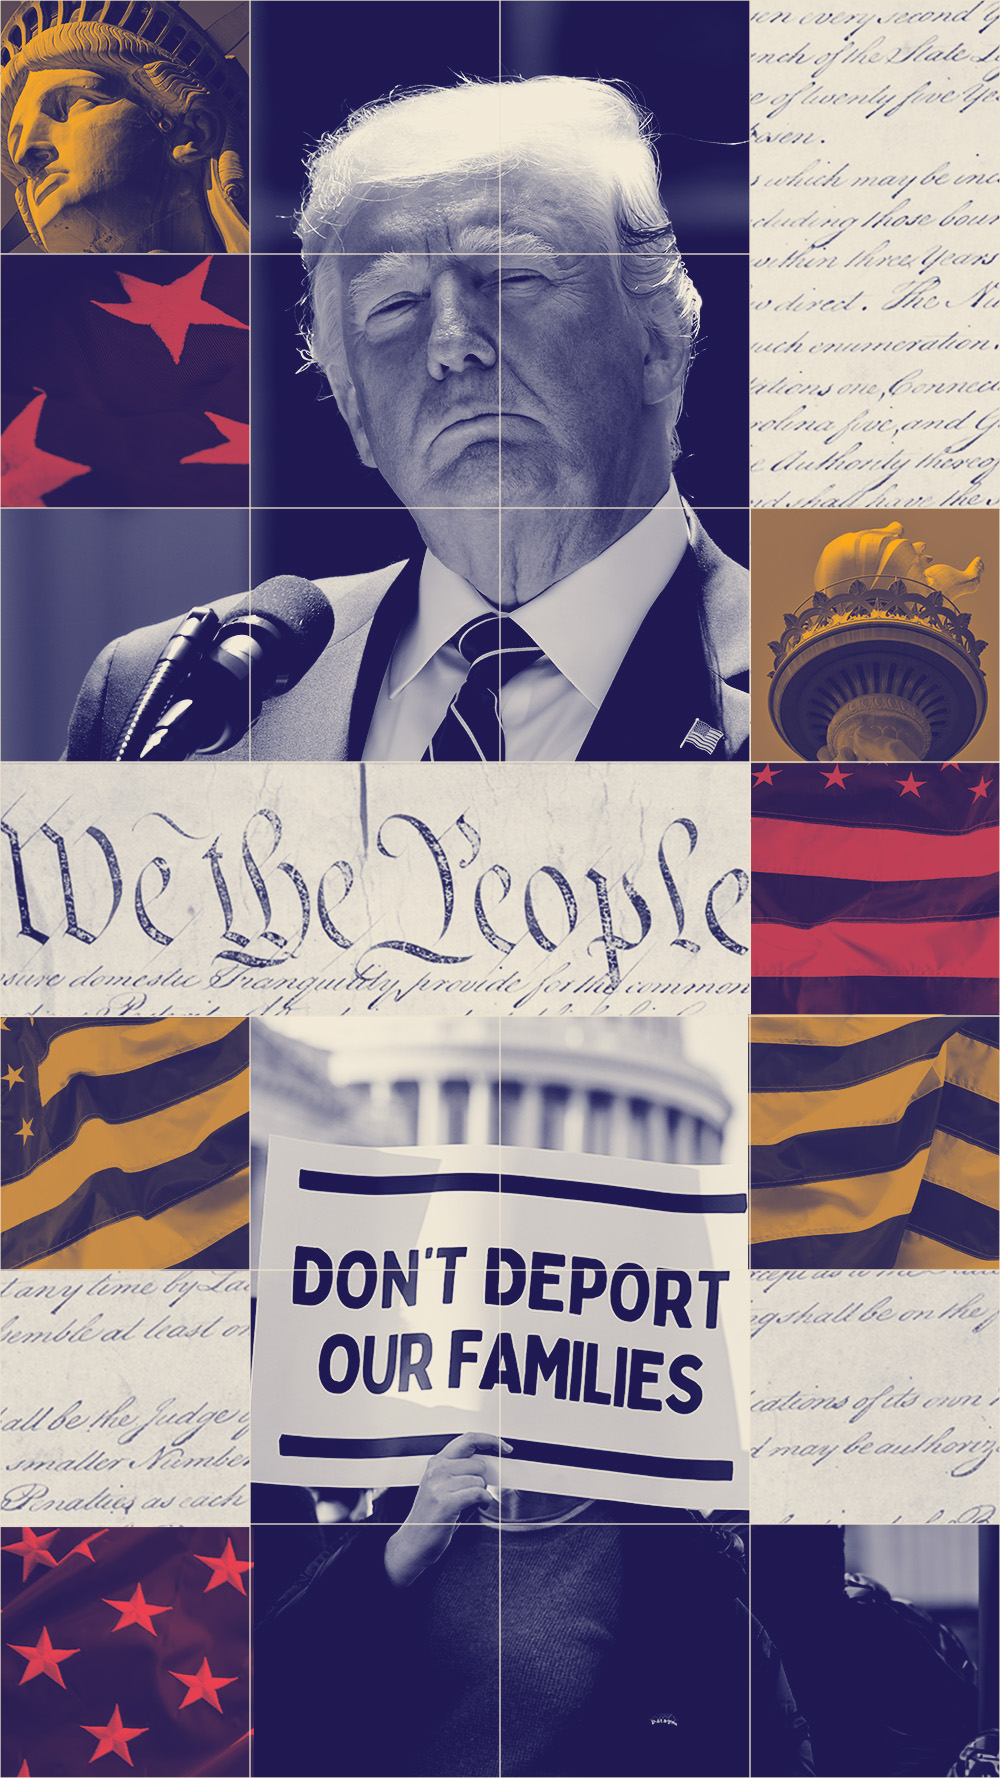 A graphic featuring Trump and imagery pertaining to immigration.